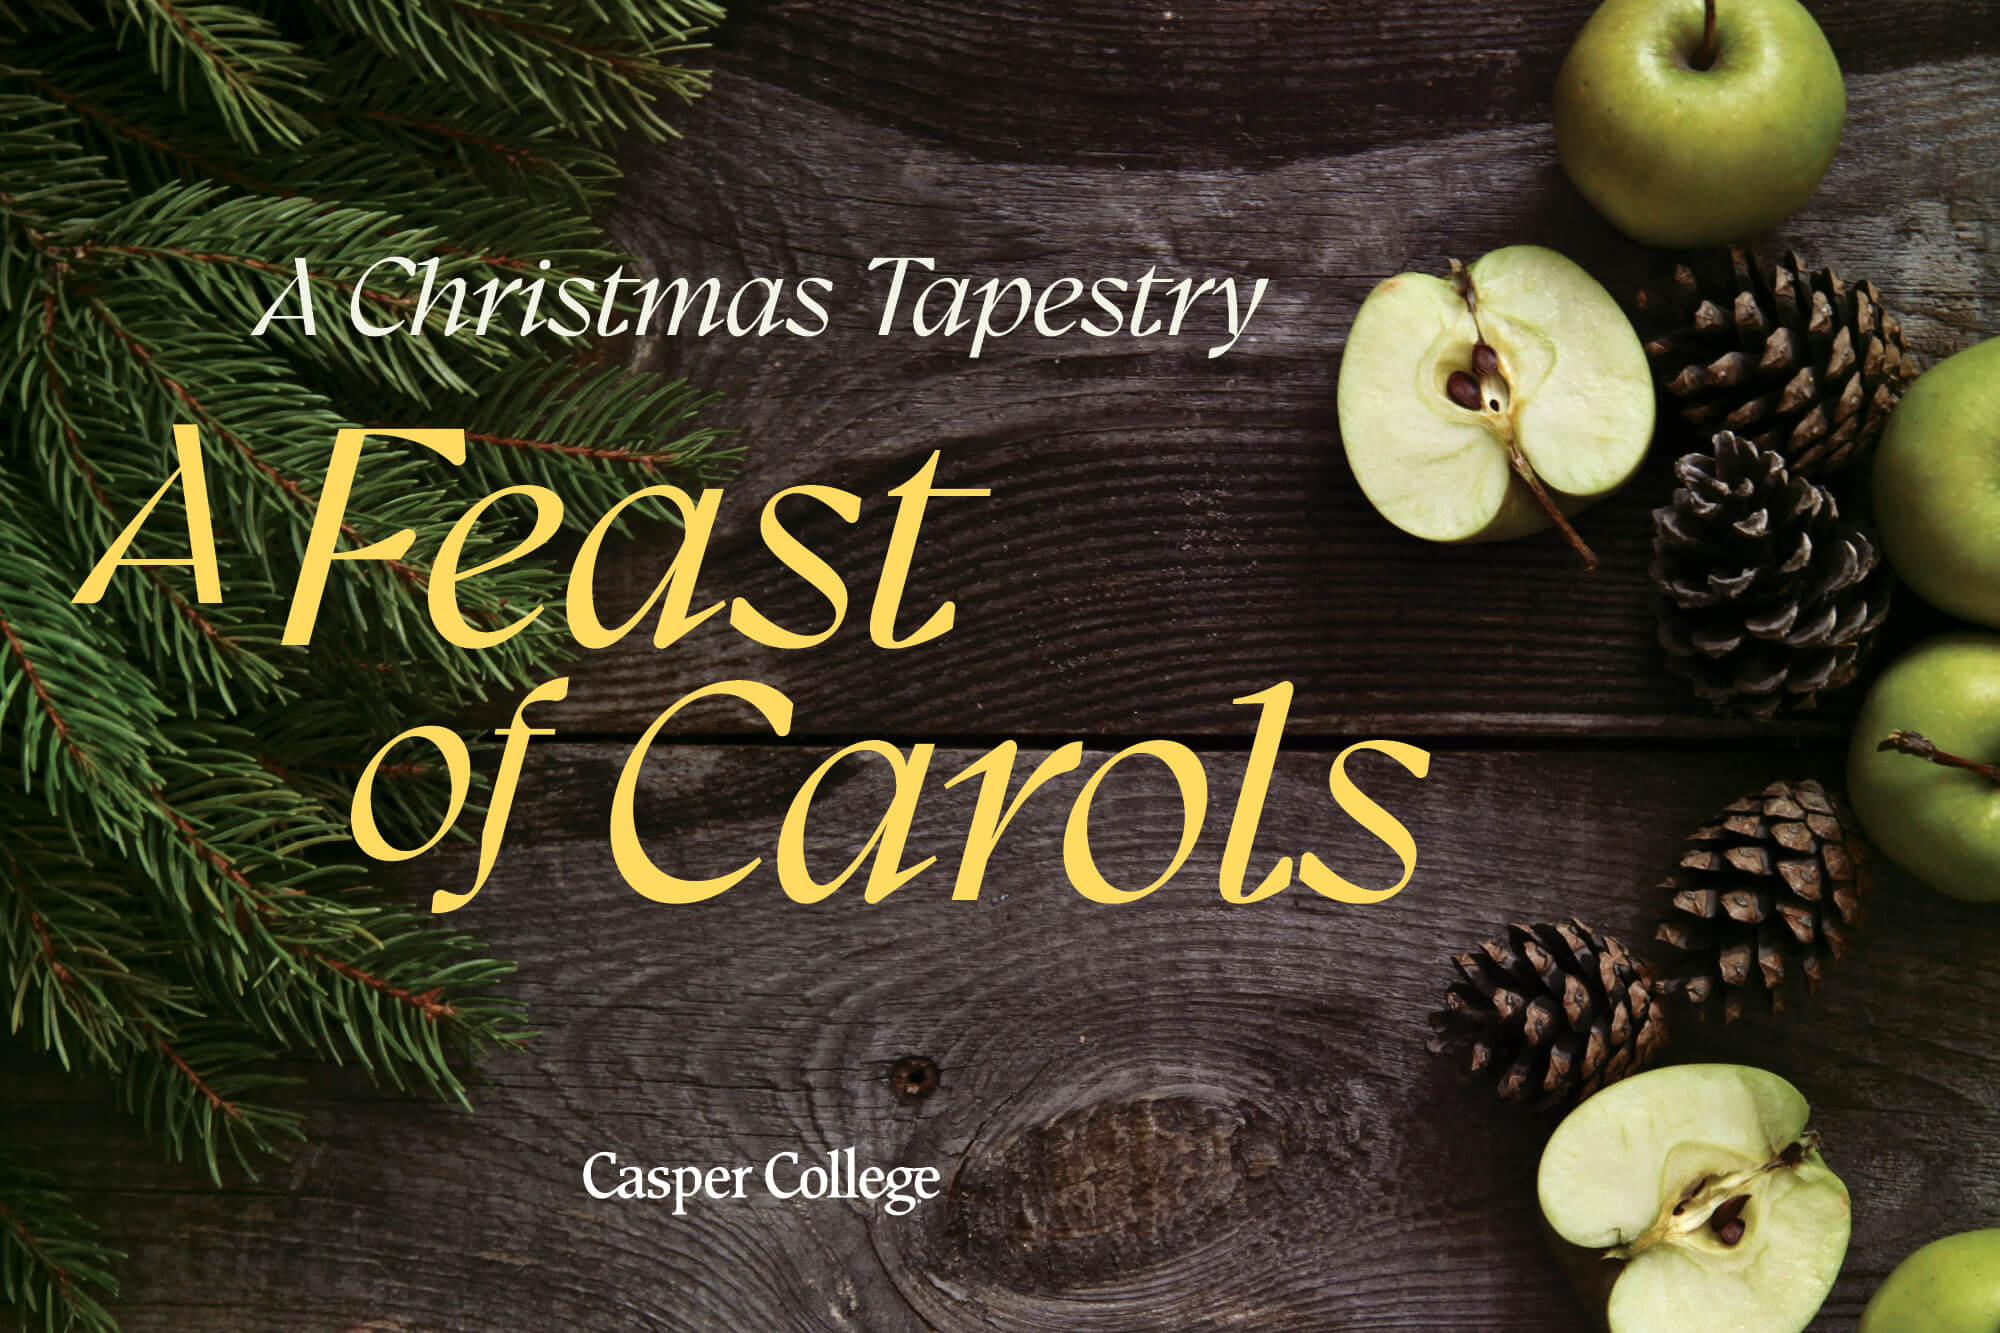 Image for the 2024 Christmas Tapestry concert press release.